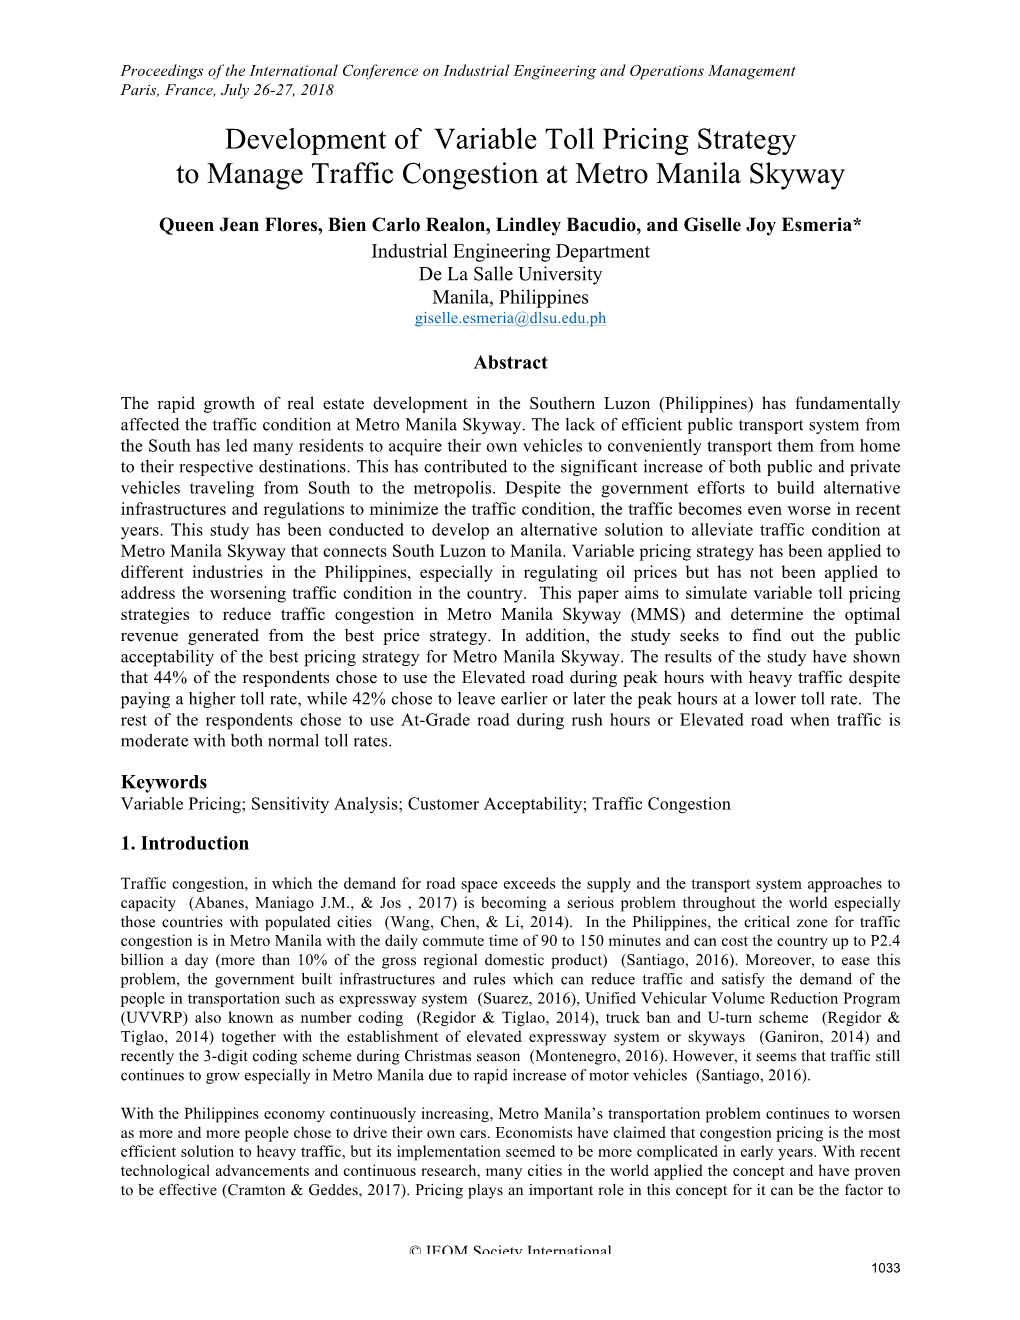 ID 191 Development of Variable Toll Pricing Strategy to Manage Traffic